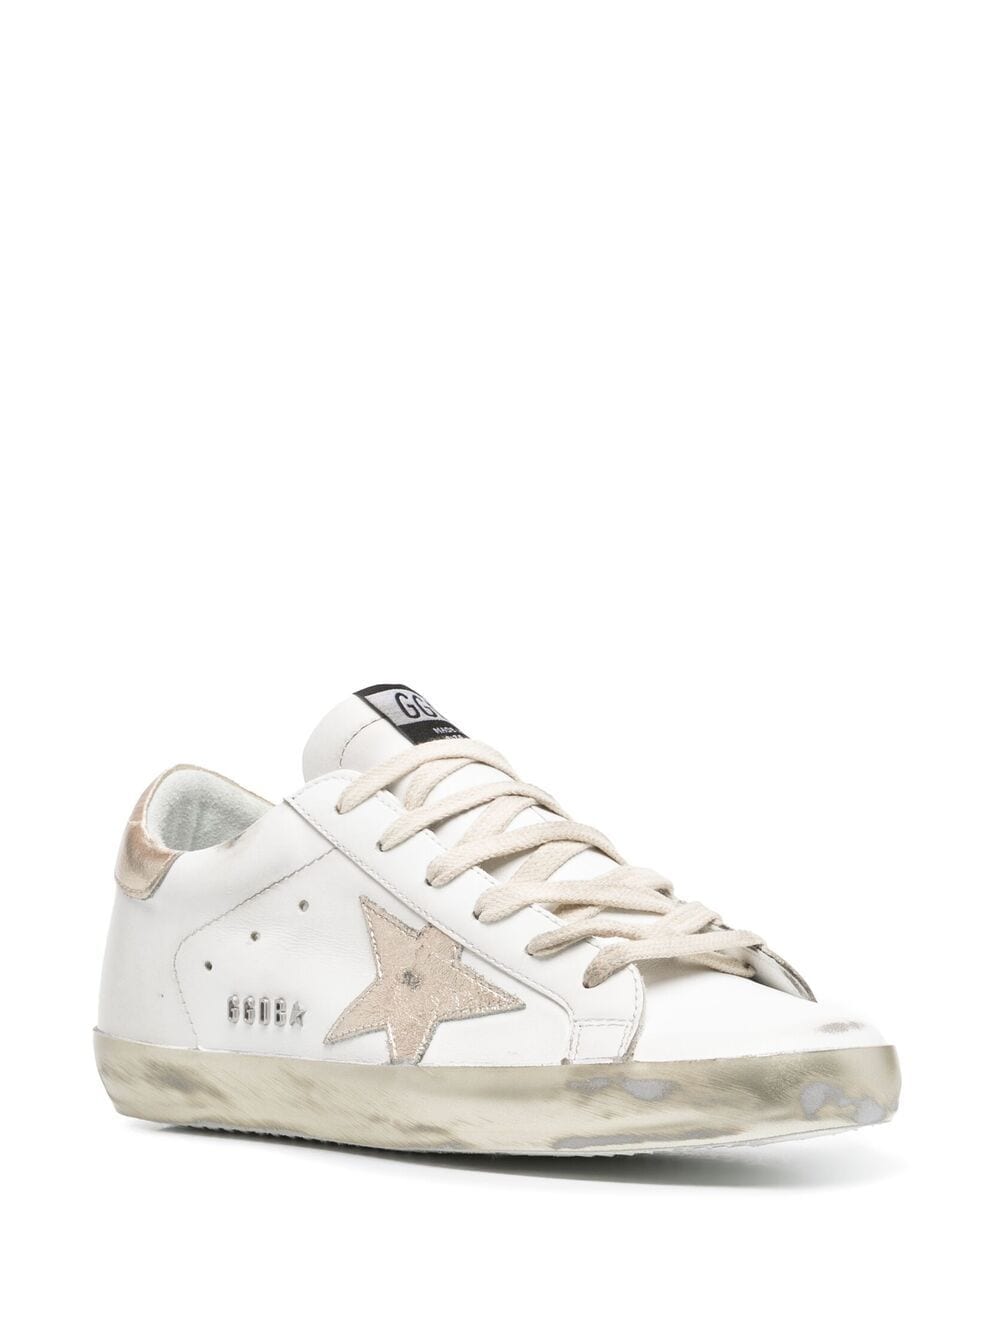 Image 2 of Golden Goose Super-Star leather sneakers